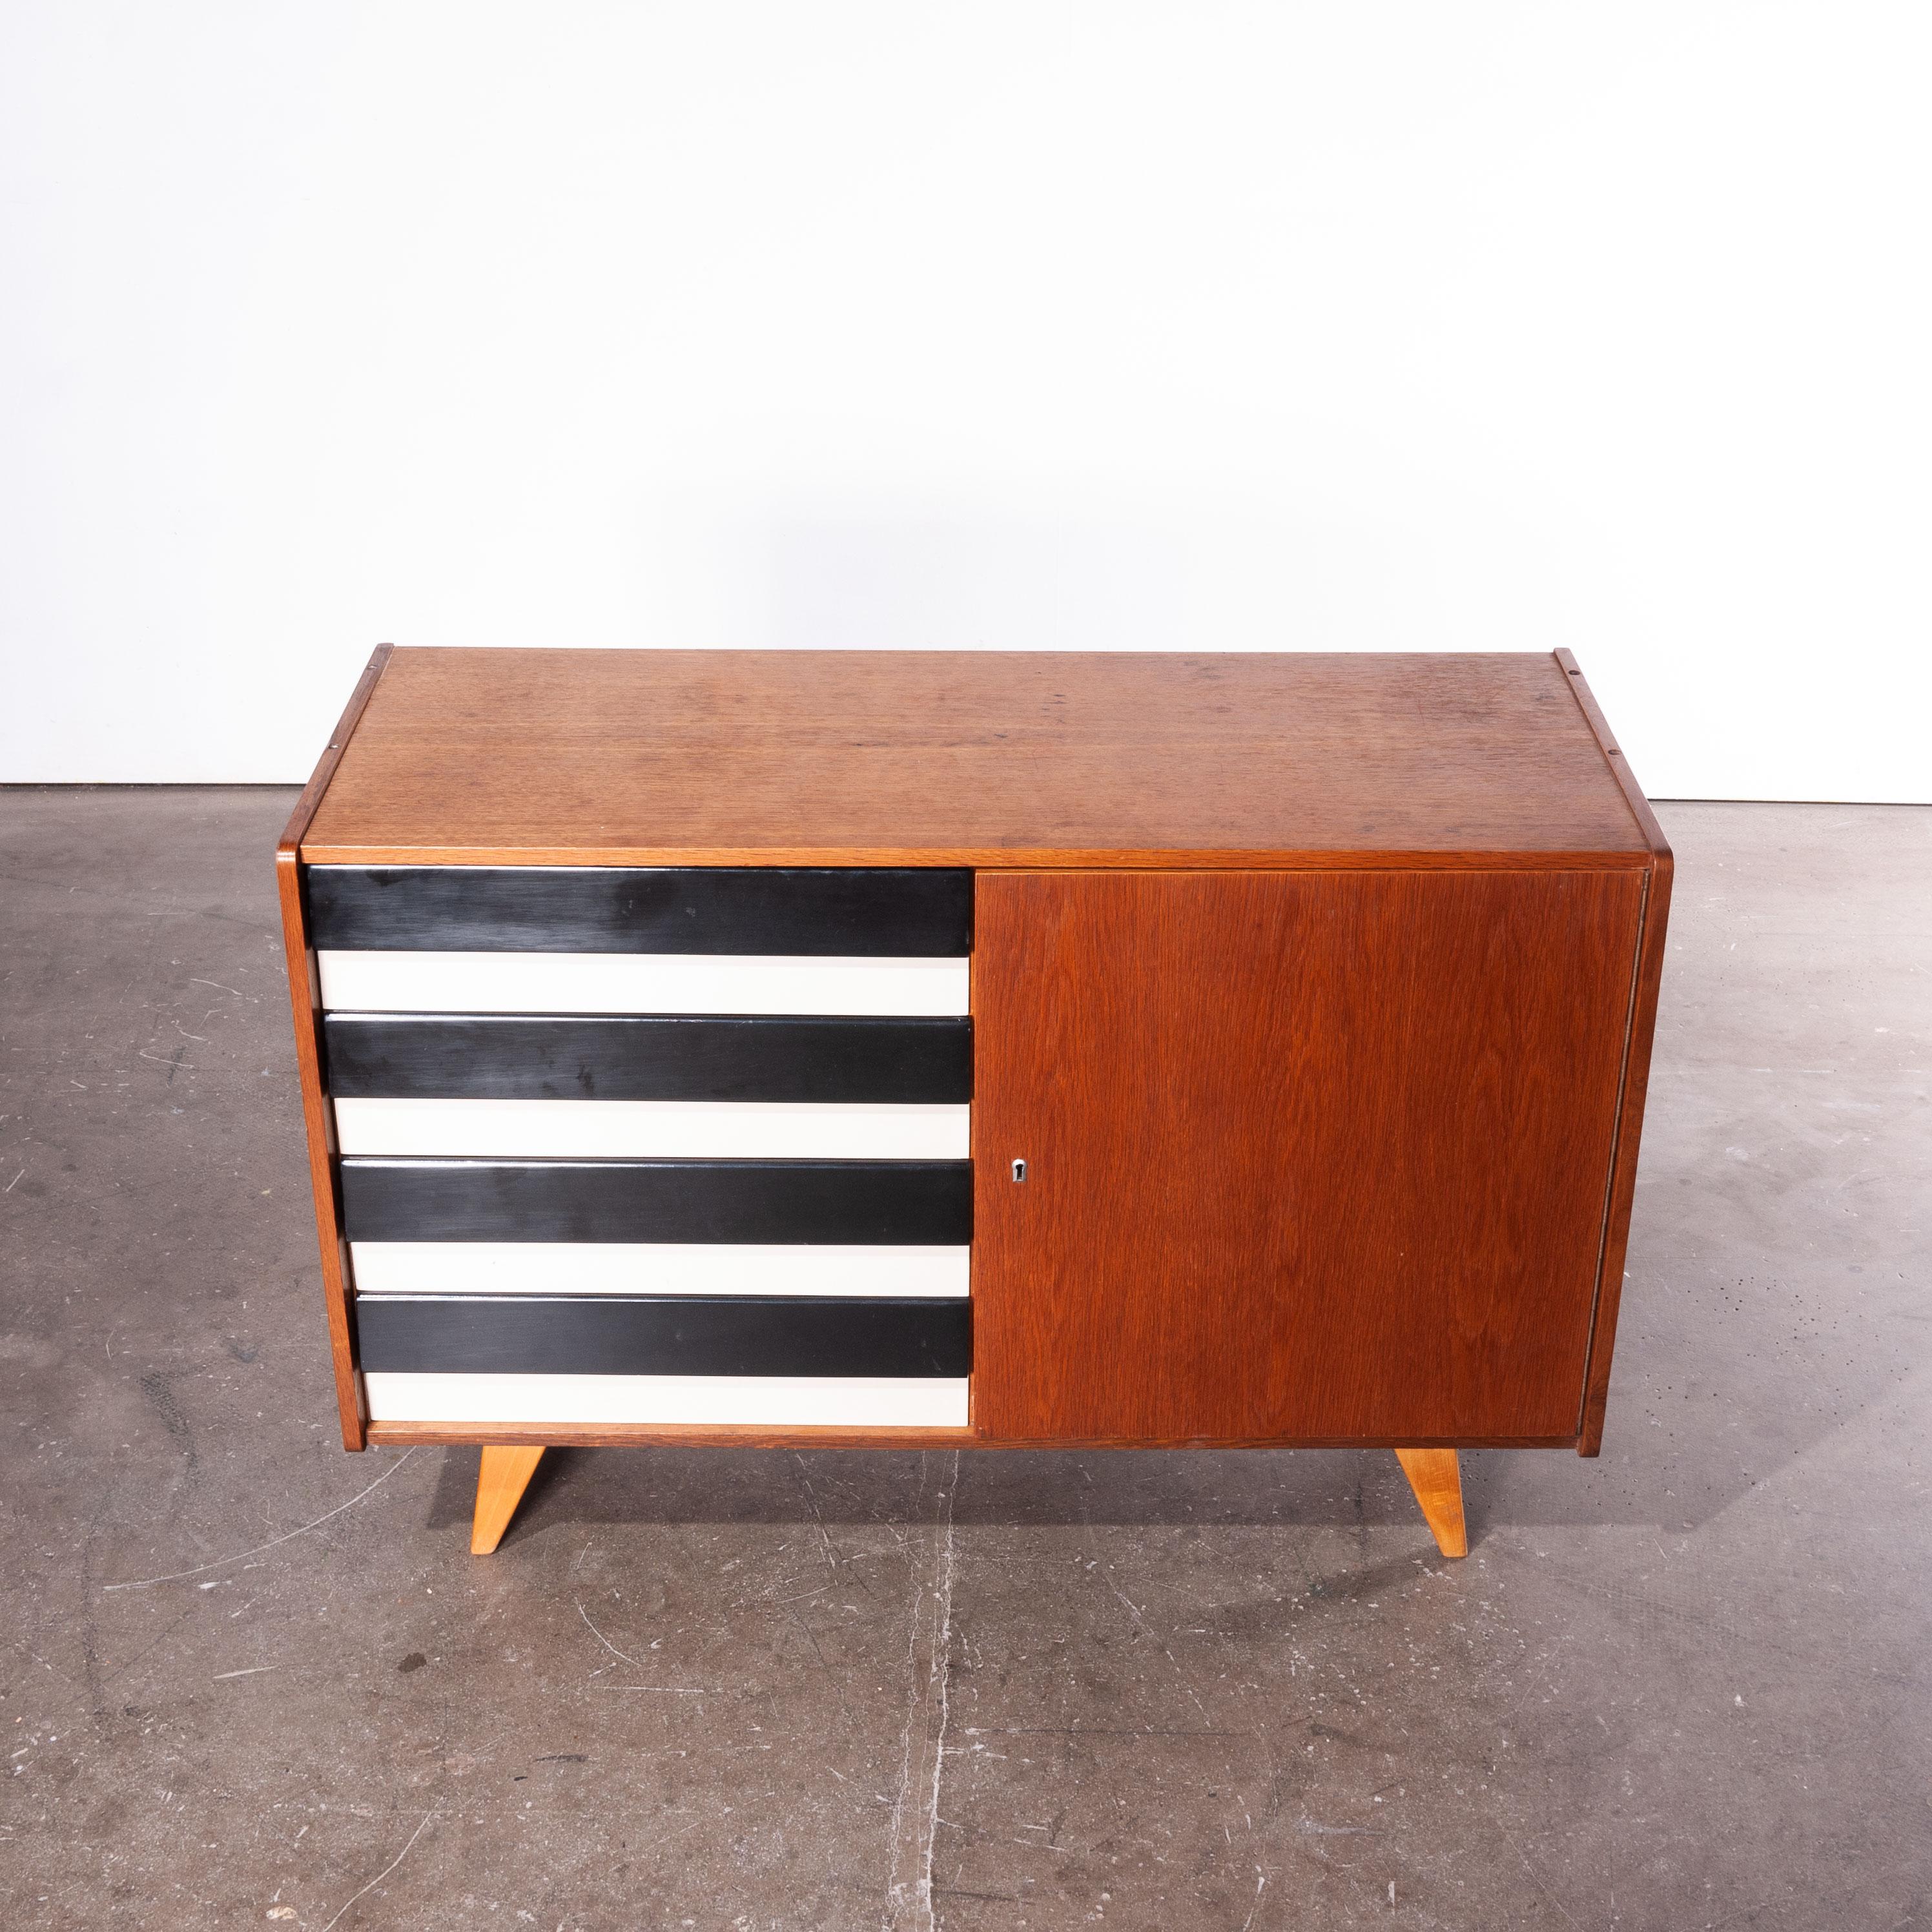 Model U-458, 1950s vintage four drawer Oak chest of drawers and cabinet by Jiri Jiroutek for Interieur Praha. These chest of drawers/cabinets by Praha are increasingly popular due to their practical size and number of drawers and this piece is a